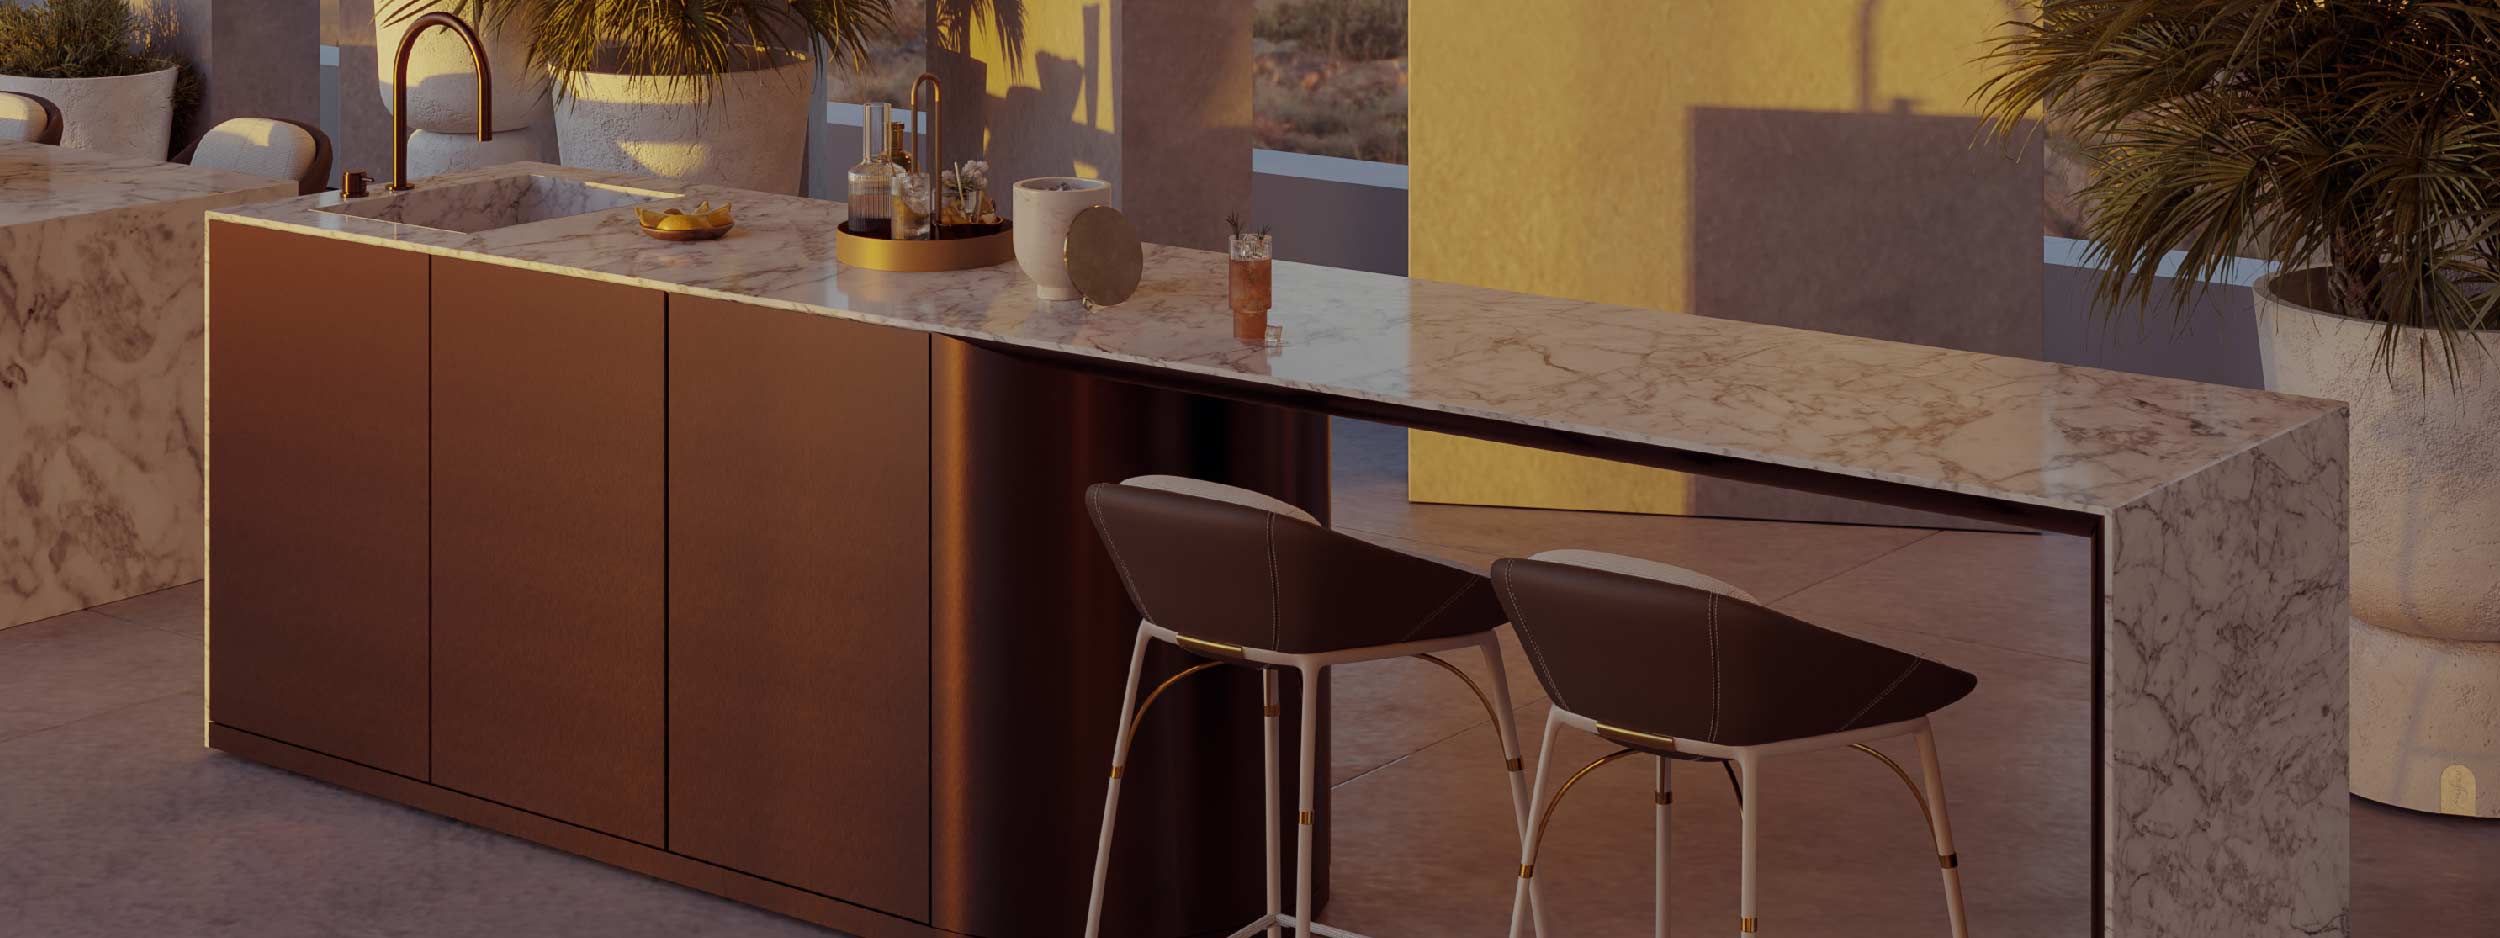 Image of Zest outdoor kitchen & bar counter with Nero bar stools by Myface